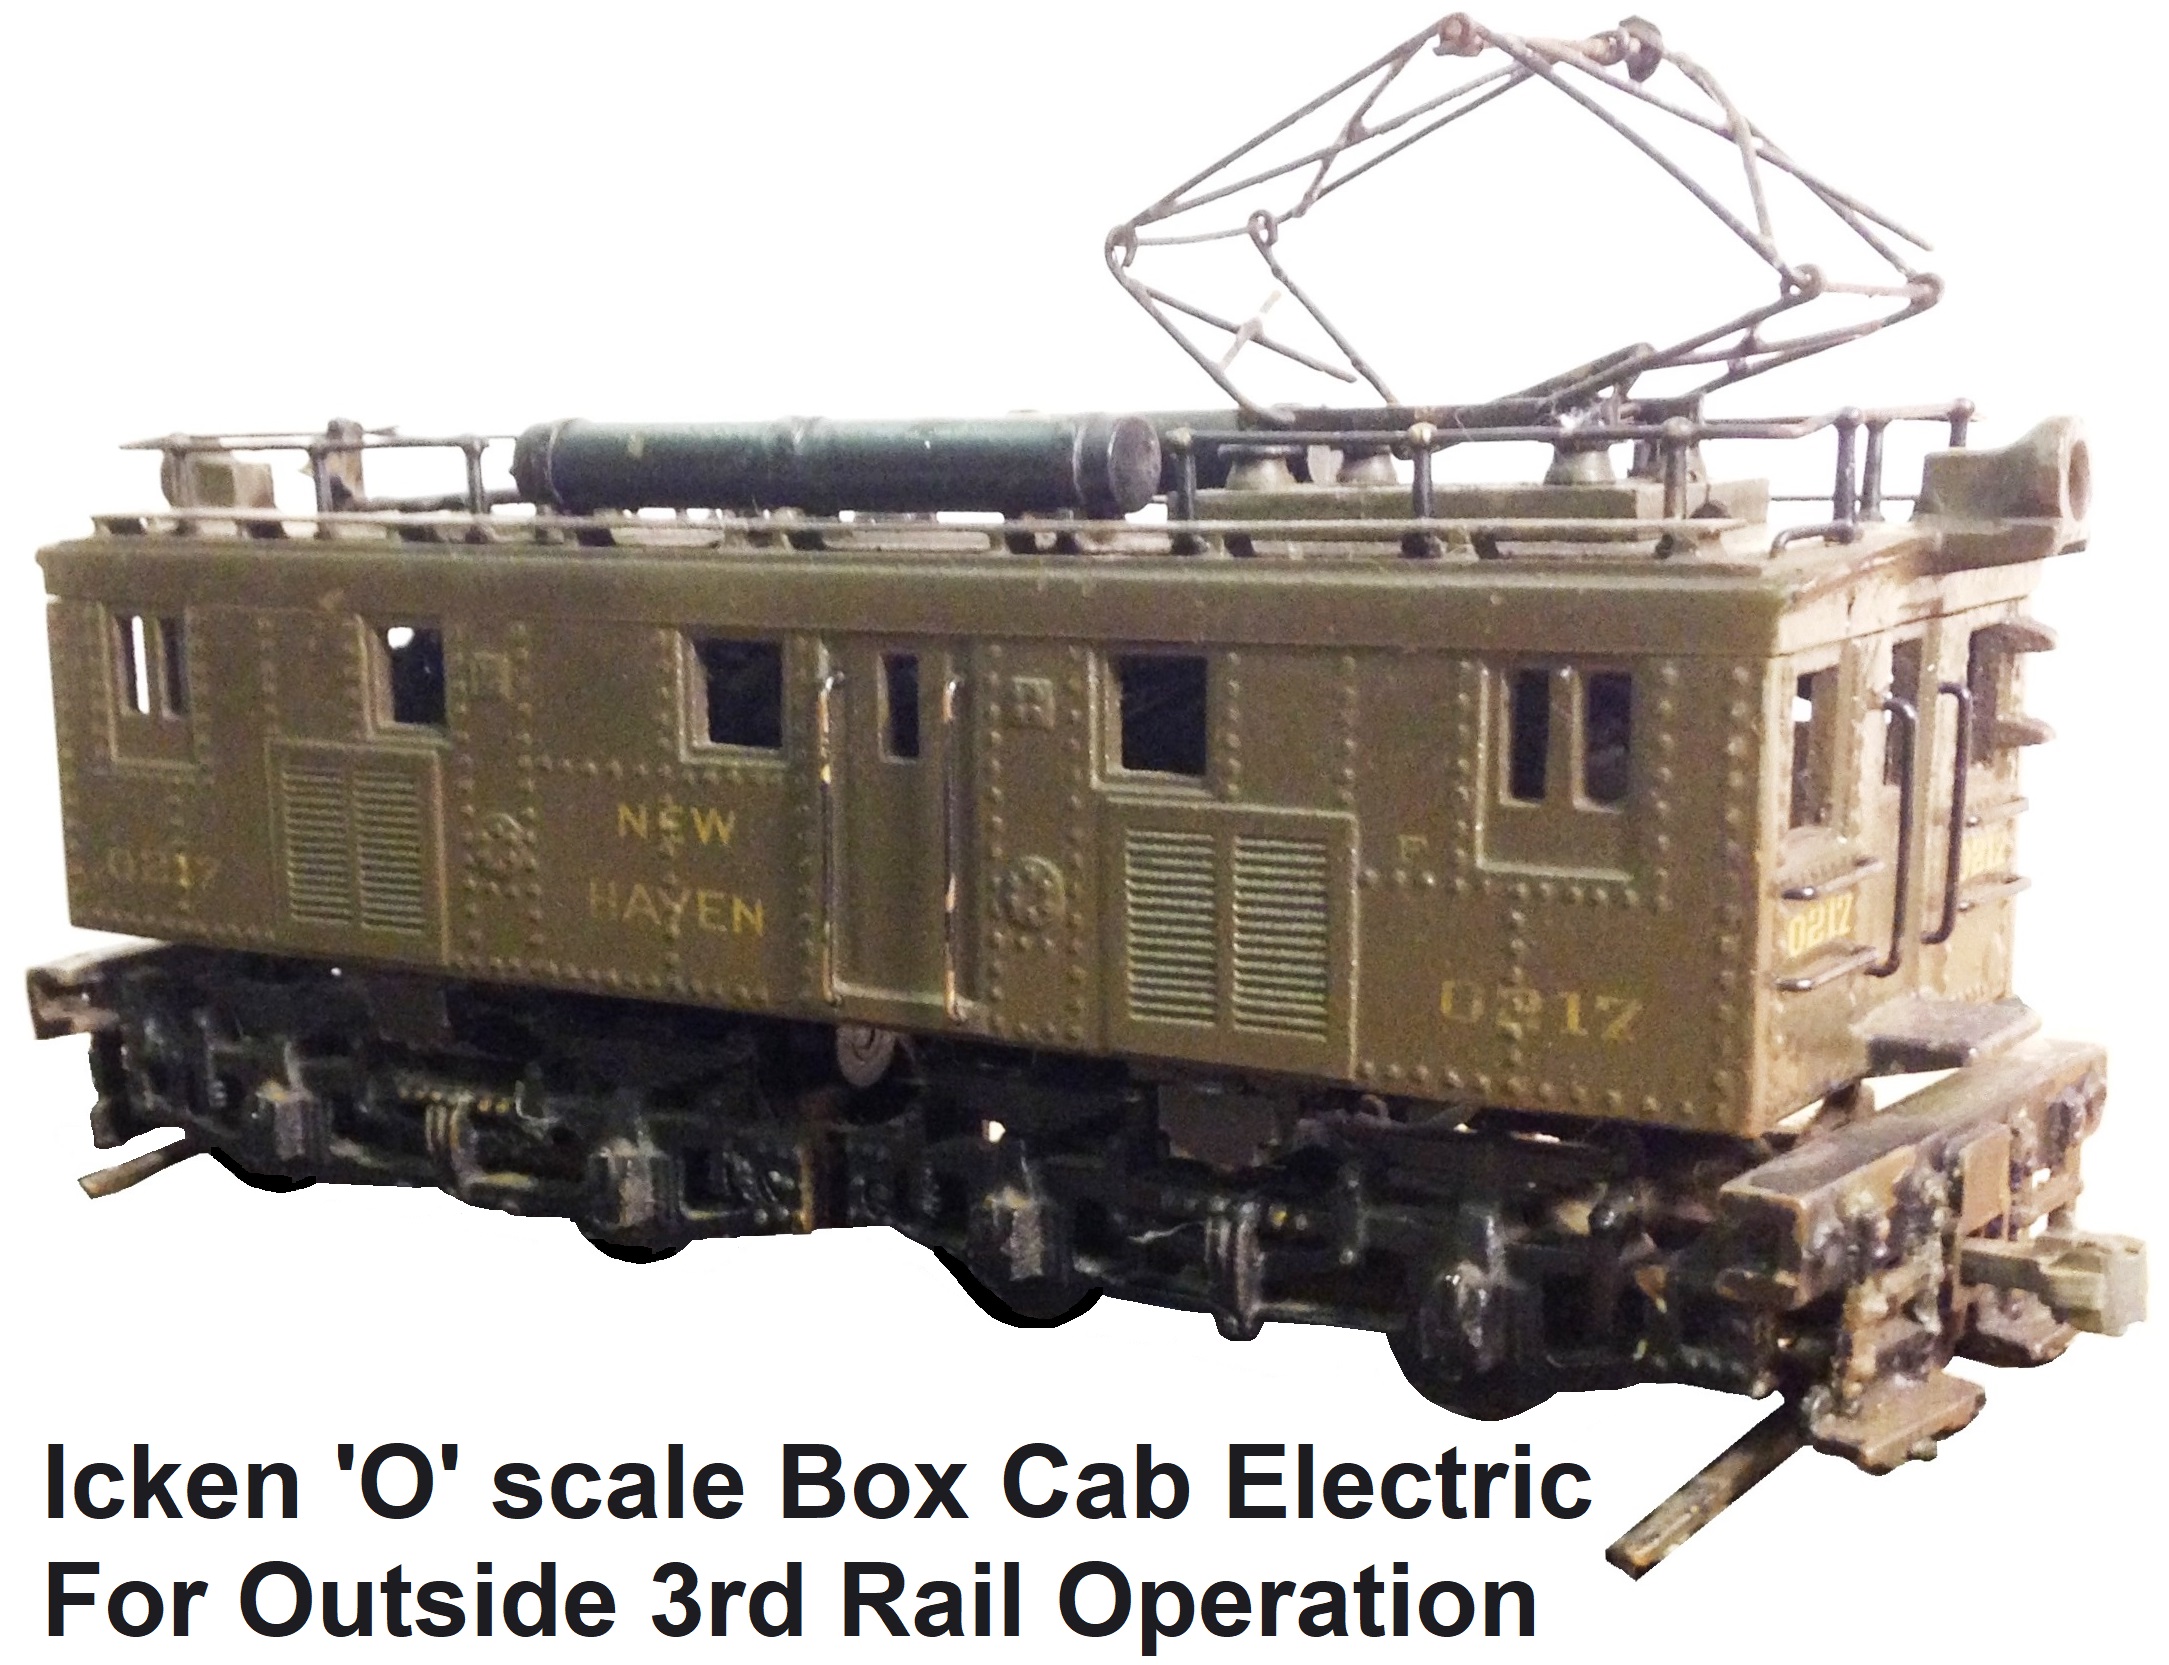 Icken Model Company N.H.N.H. & H.R.R. box cab electric switcher in 'O' scale for outside 3rd rail operation